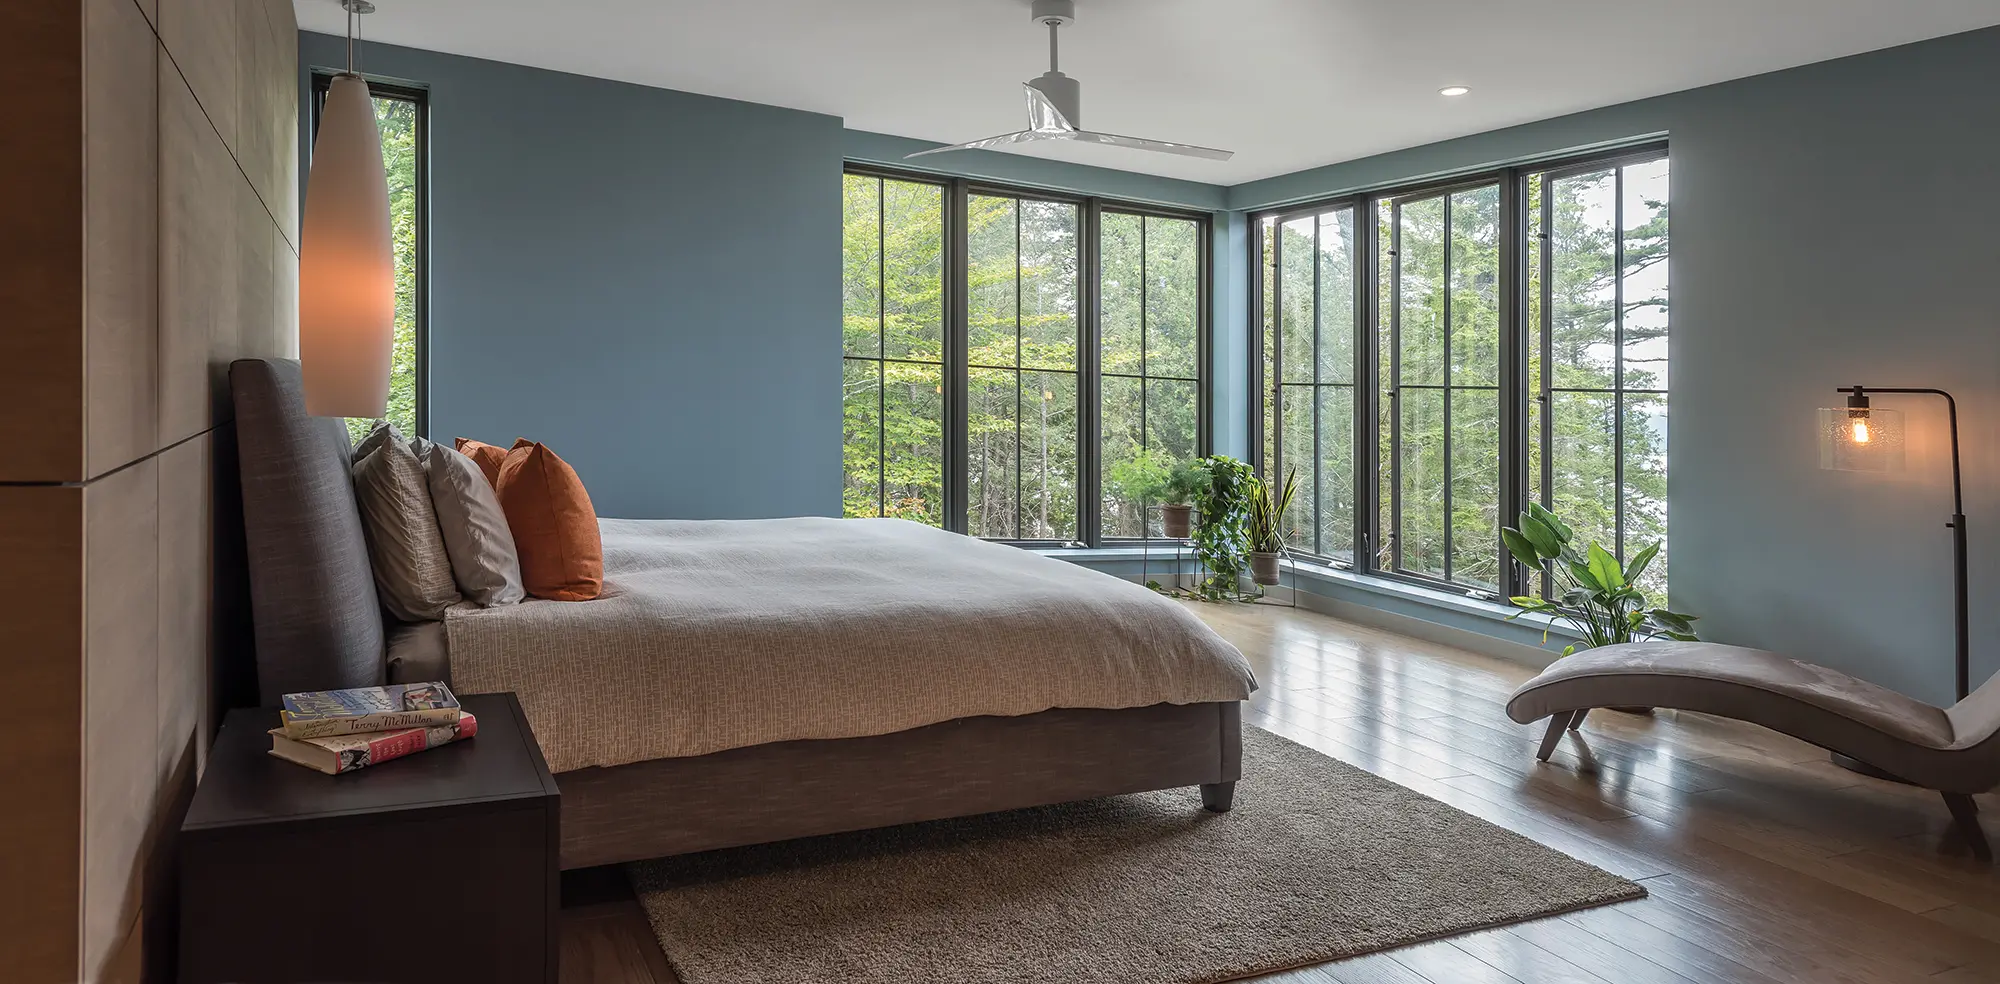 A spacious primary bedroom loaded with natural light and contemporary style.